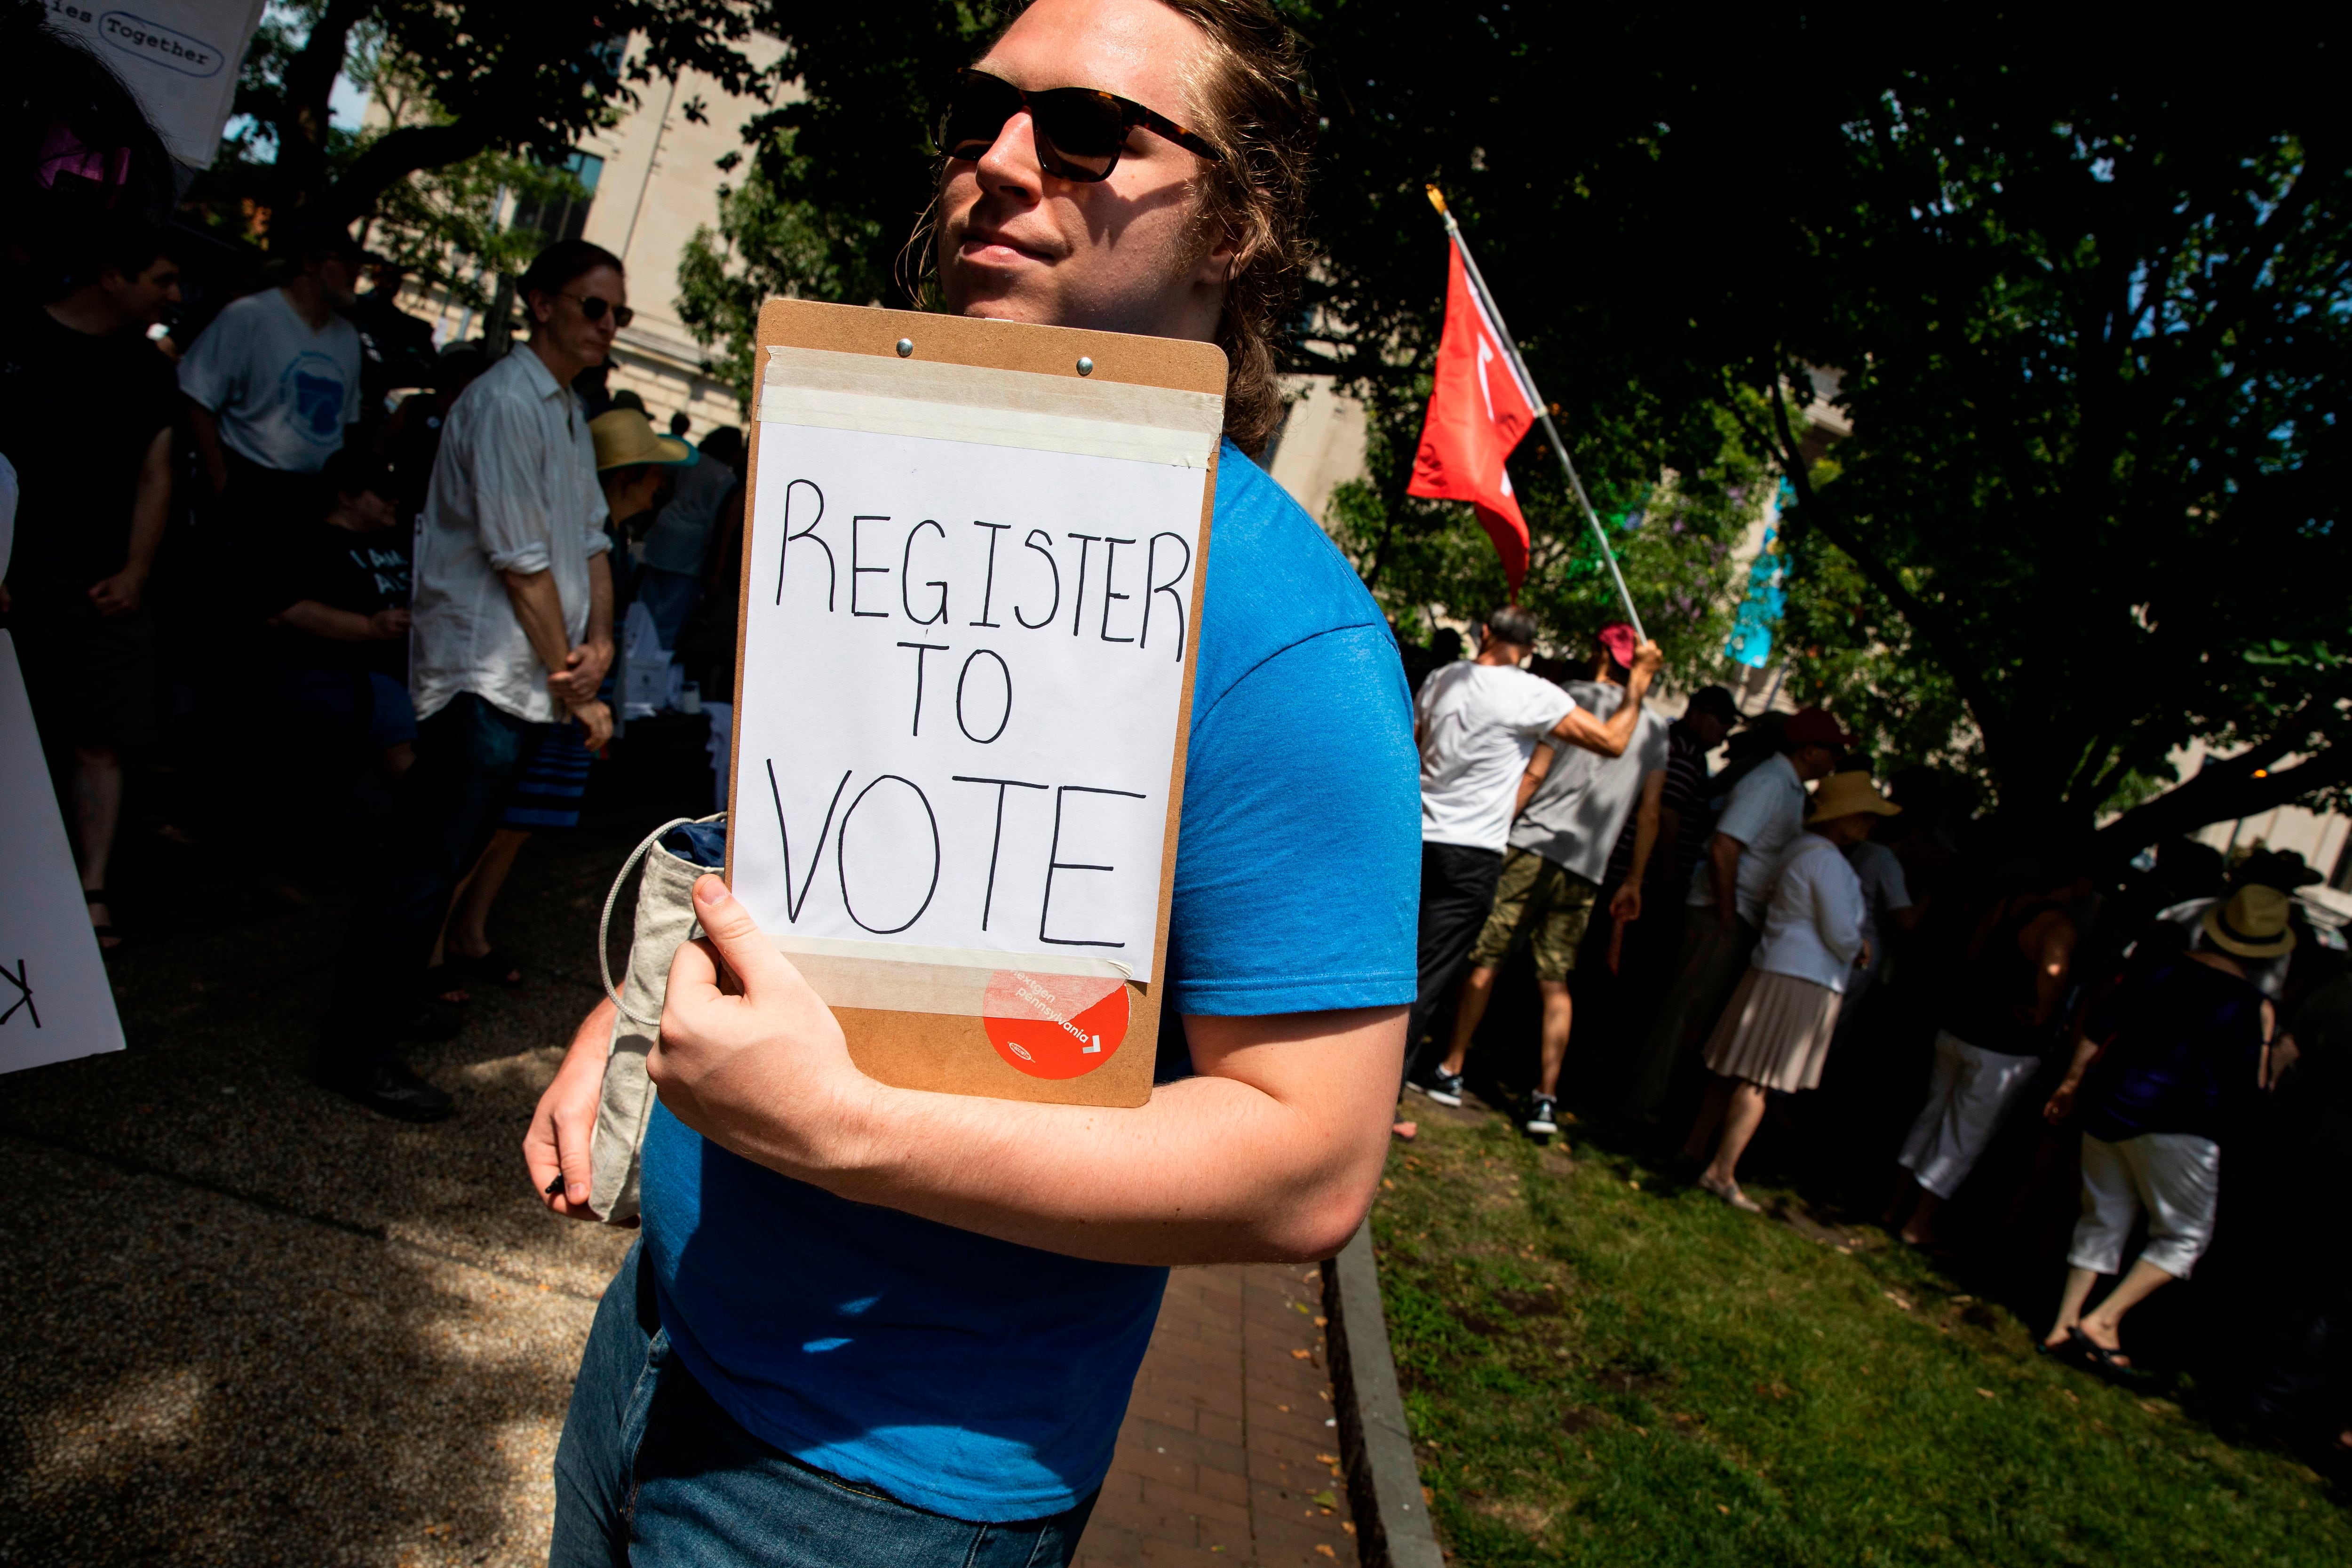 A person holds a clipboard that reads “REGISTER TO VOTE” on white paper.